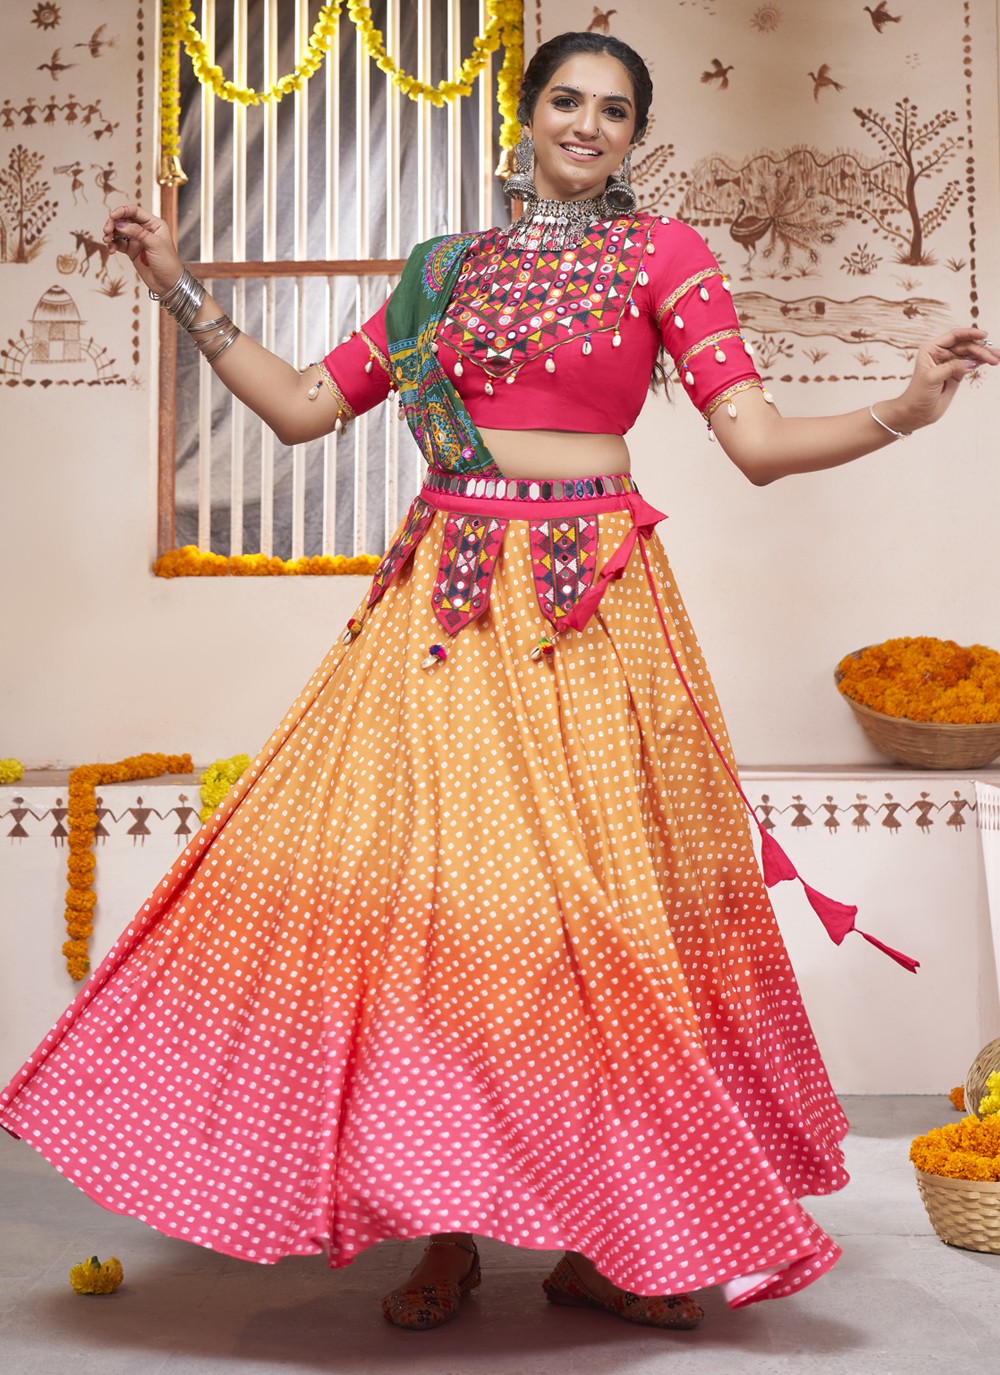 Patchwork Lehengas Are In & Here's Where To Get Them! | Lehenga designs,  Indian bridesmaid dresses, Indian bridal outfits